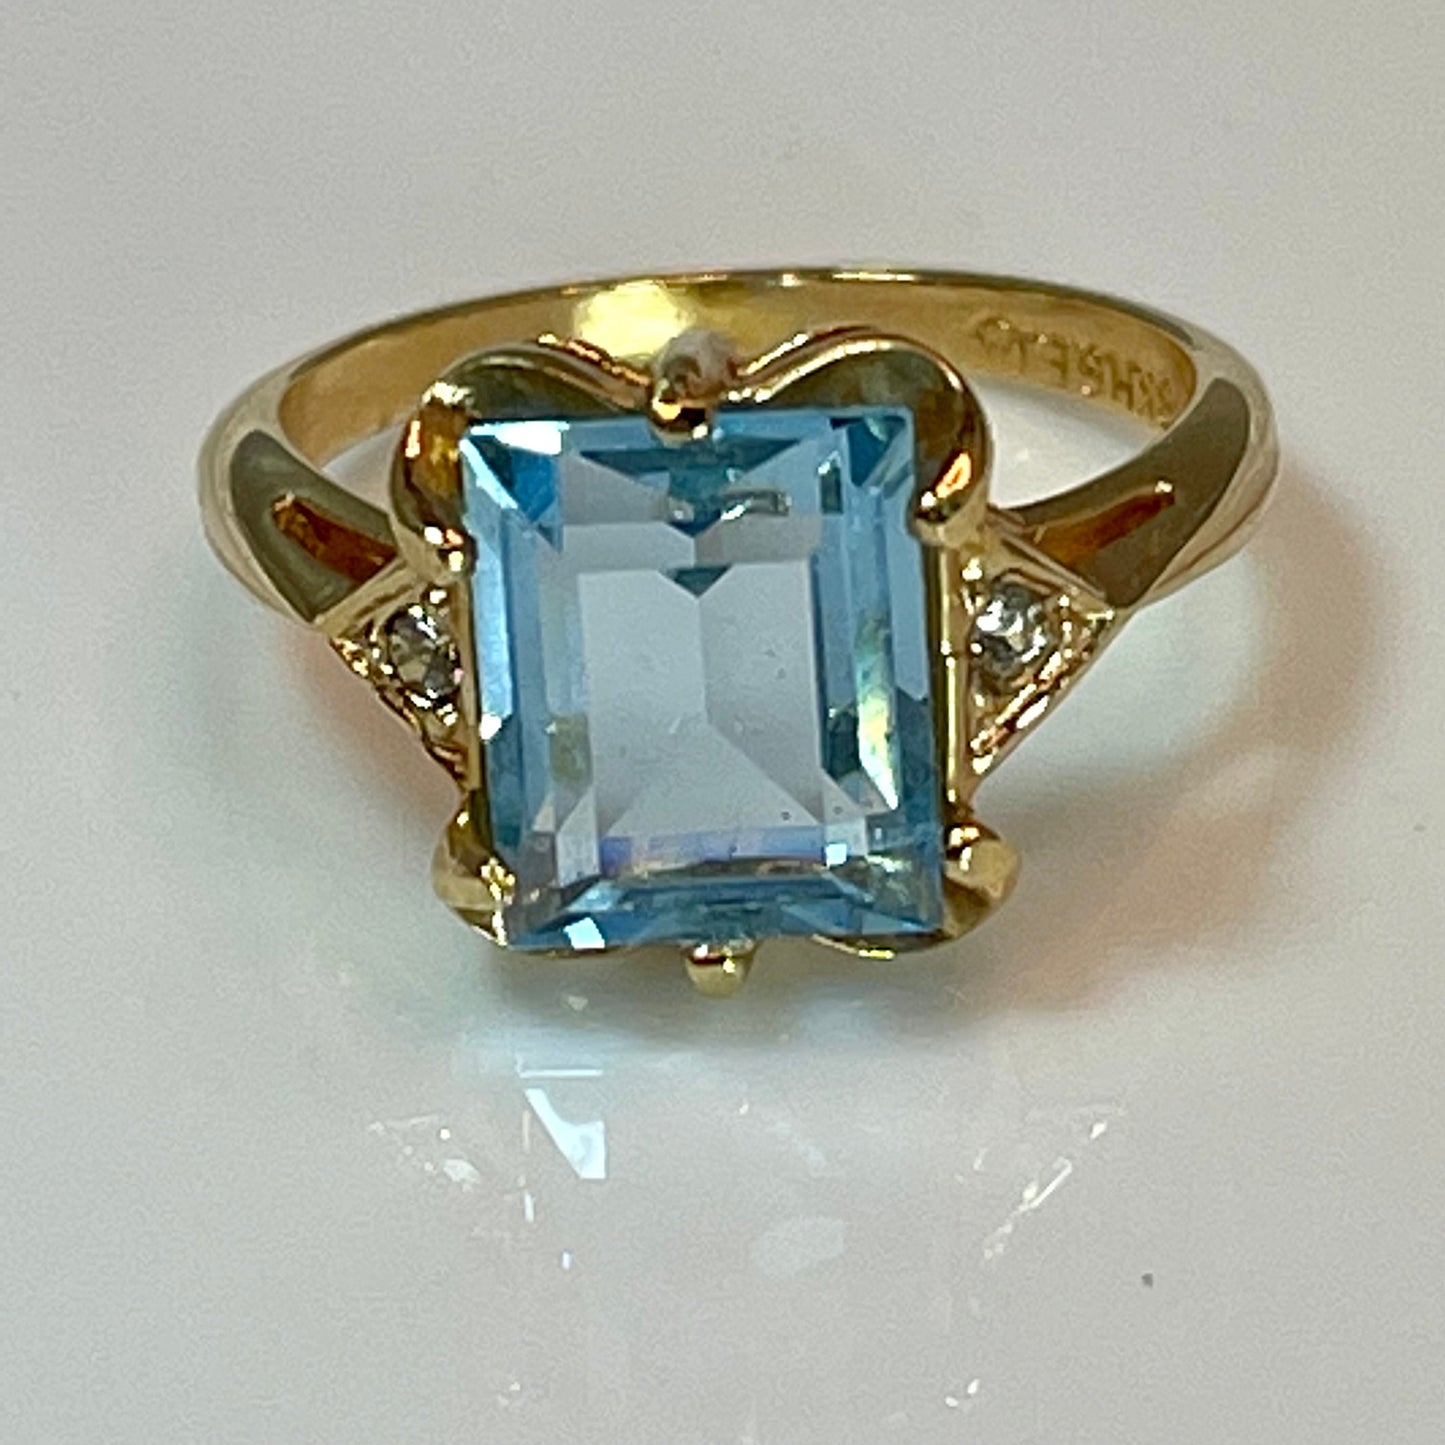 Vintage Ring Emerald Cut Blue Topaz Crystal 18kt Yellow Gold Eectroplated Ring December Birthstone